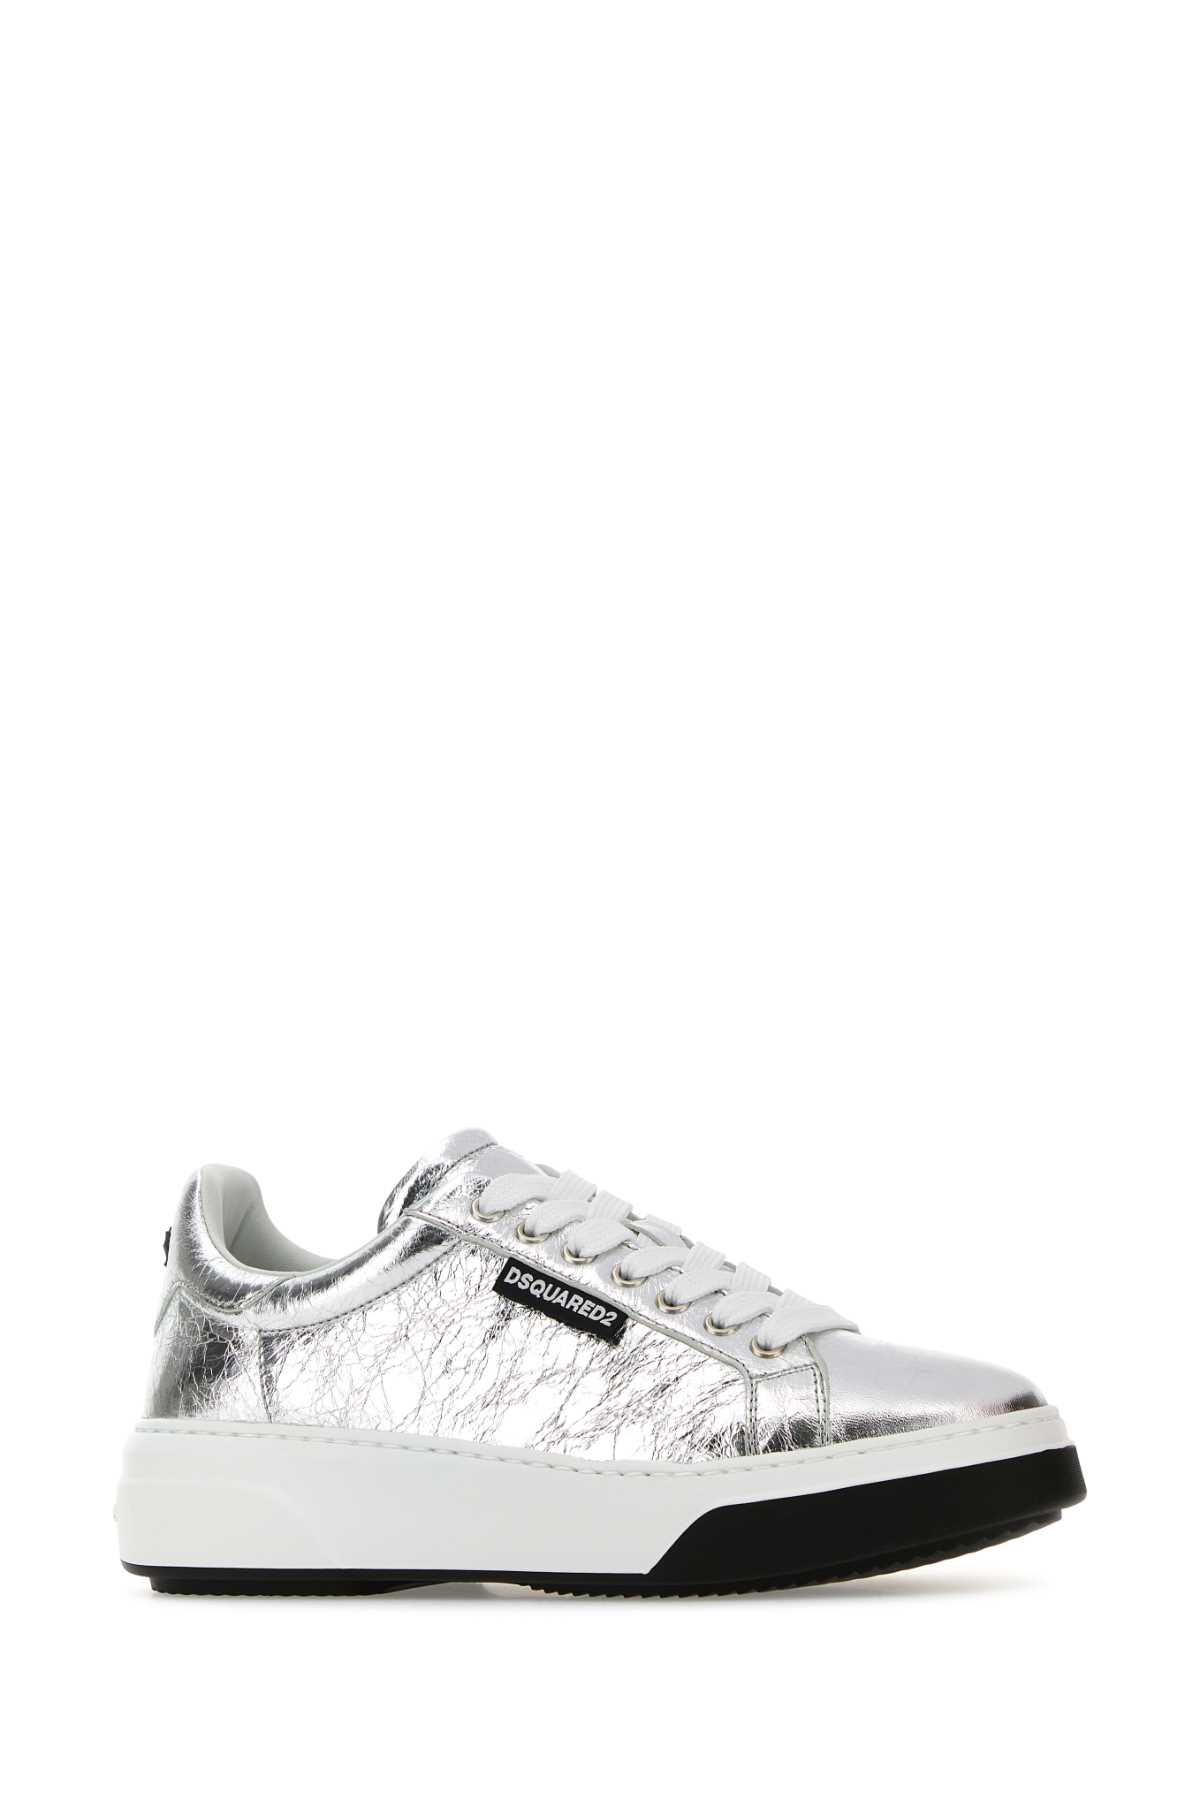 Dsquared2 Silver Leather Bumper Sneakers In Argento